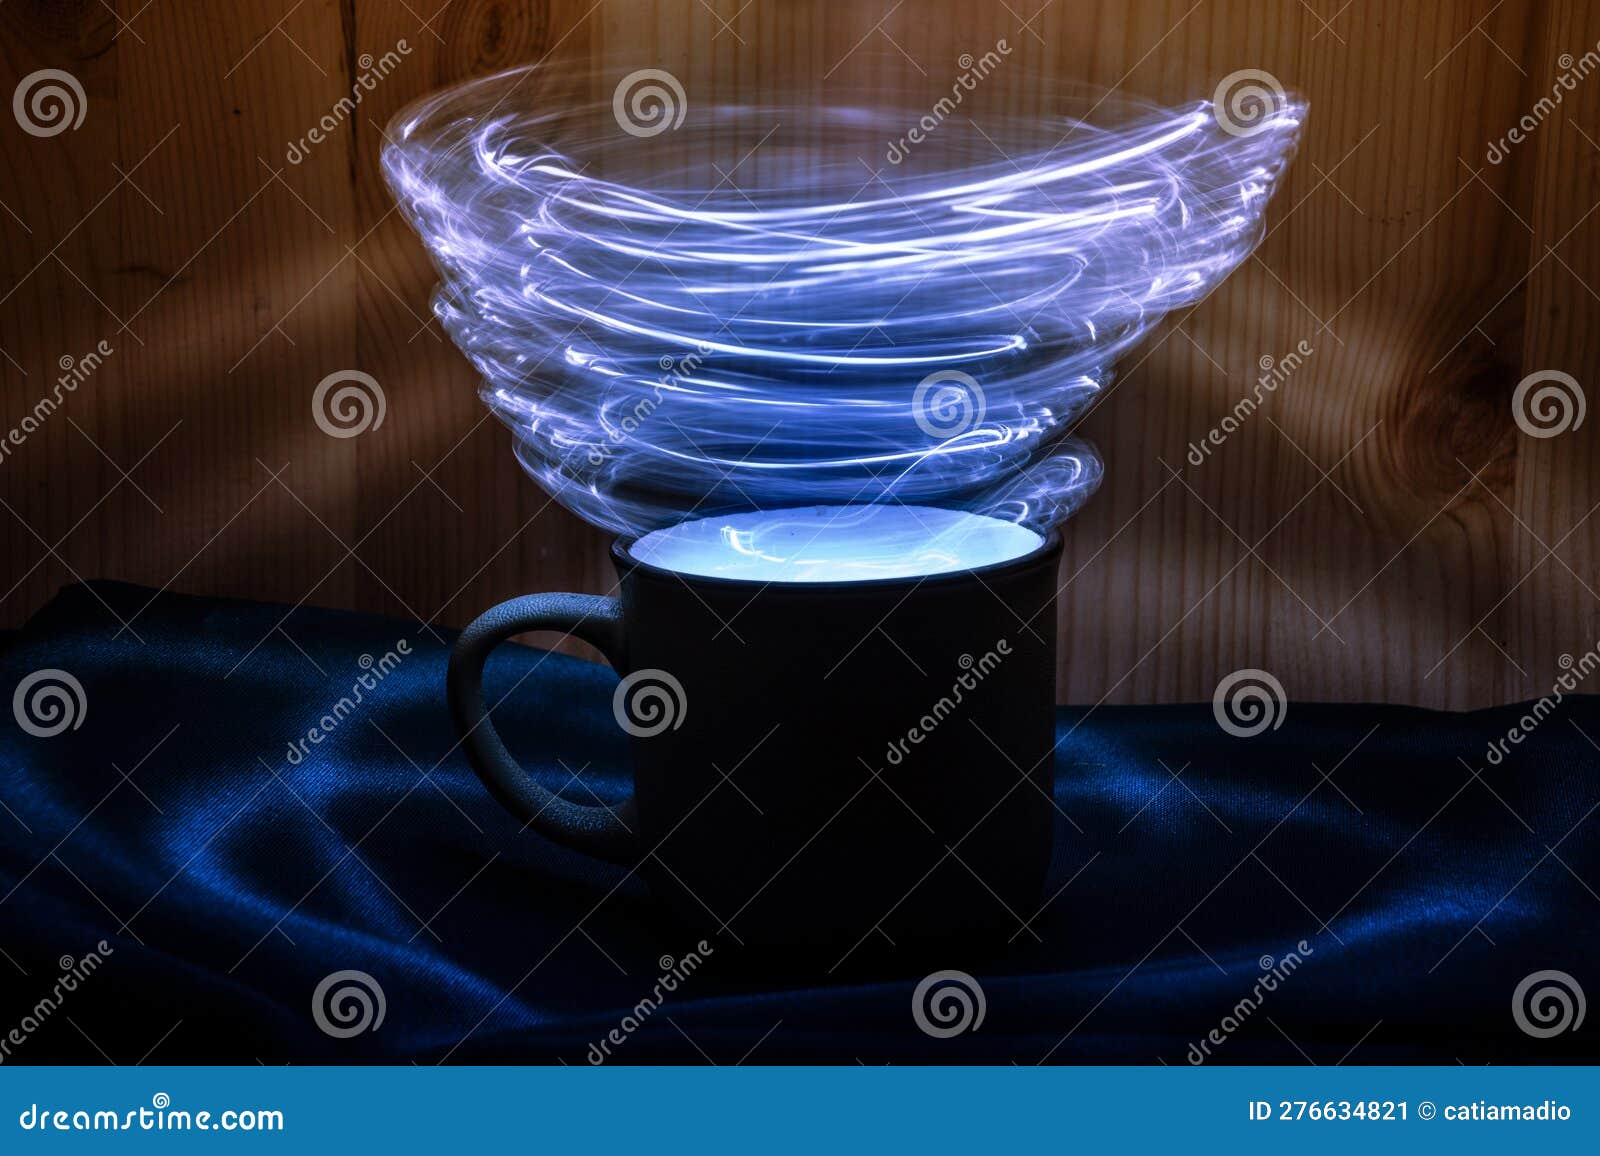 Vortex Coffee Cup and Saucer